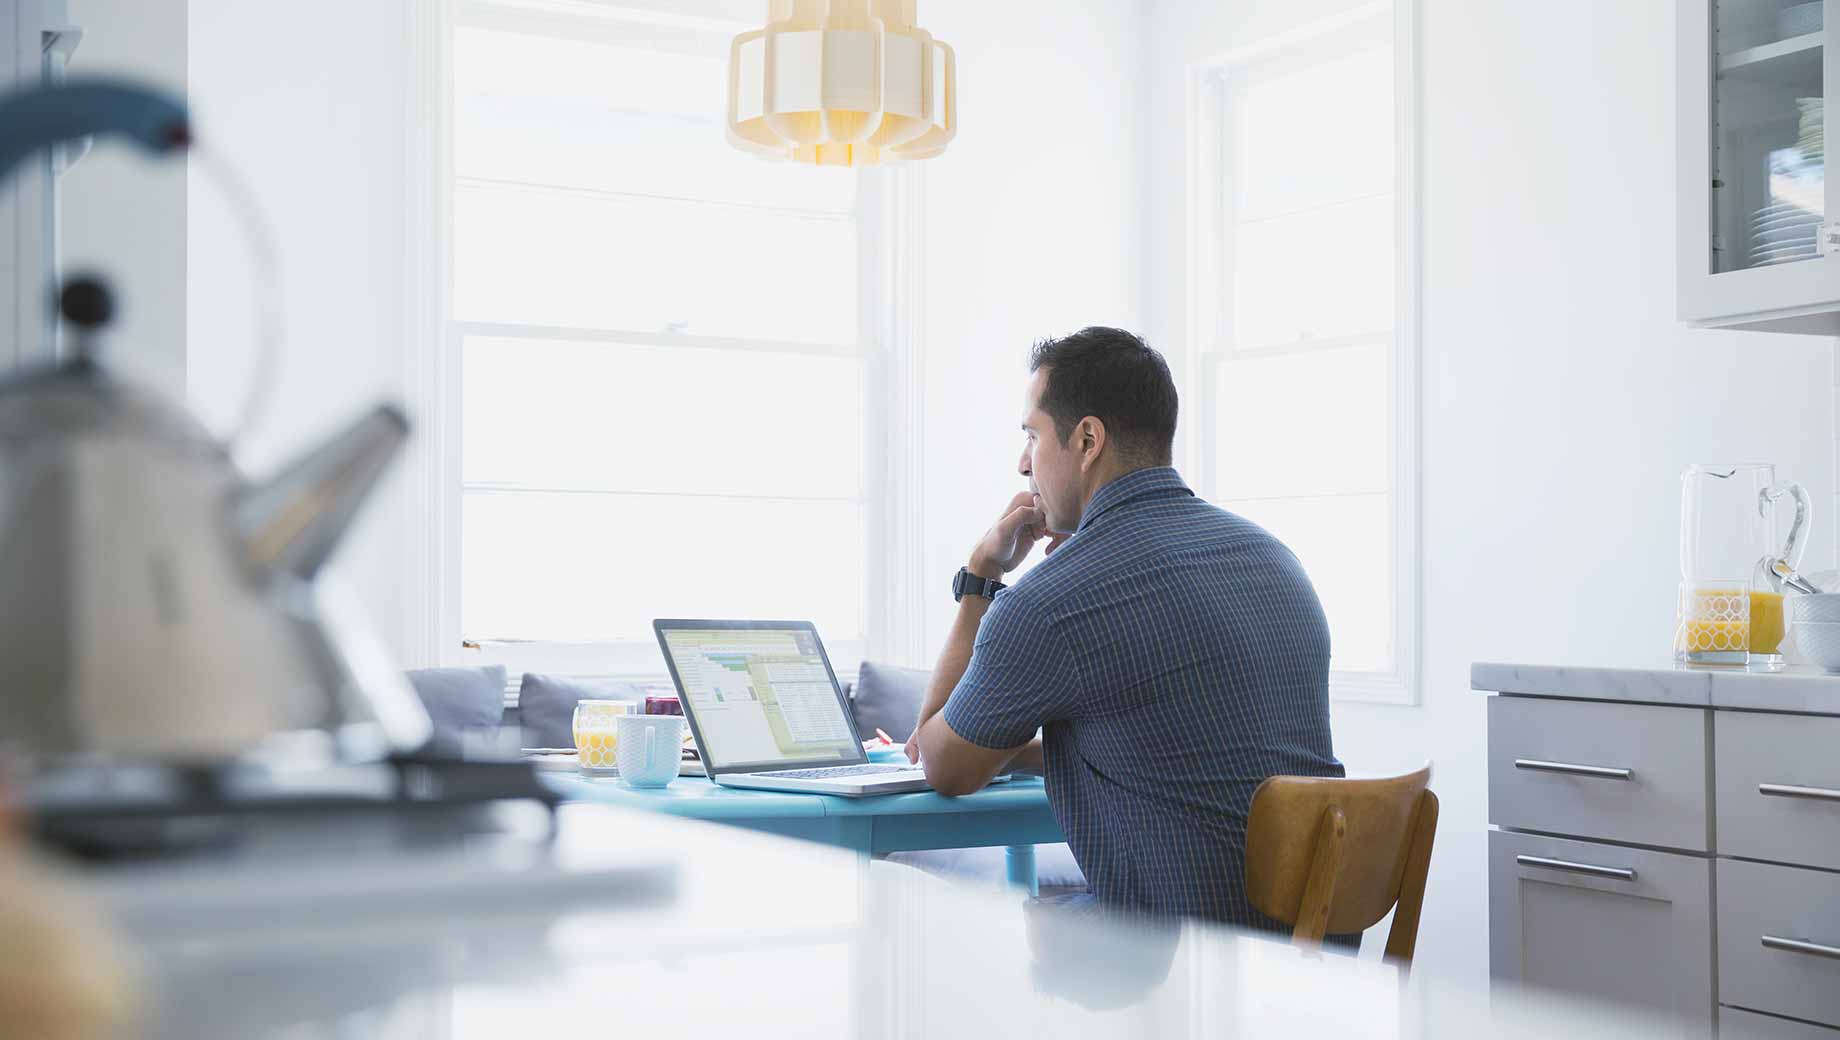 How to Manage the Loneliness and Isolation of Remote Workers